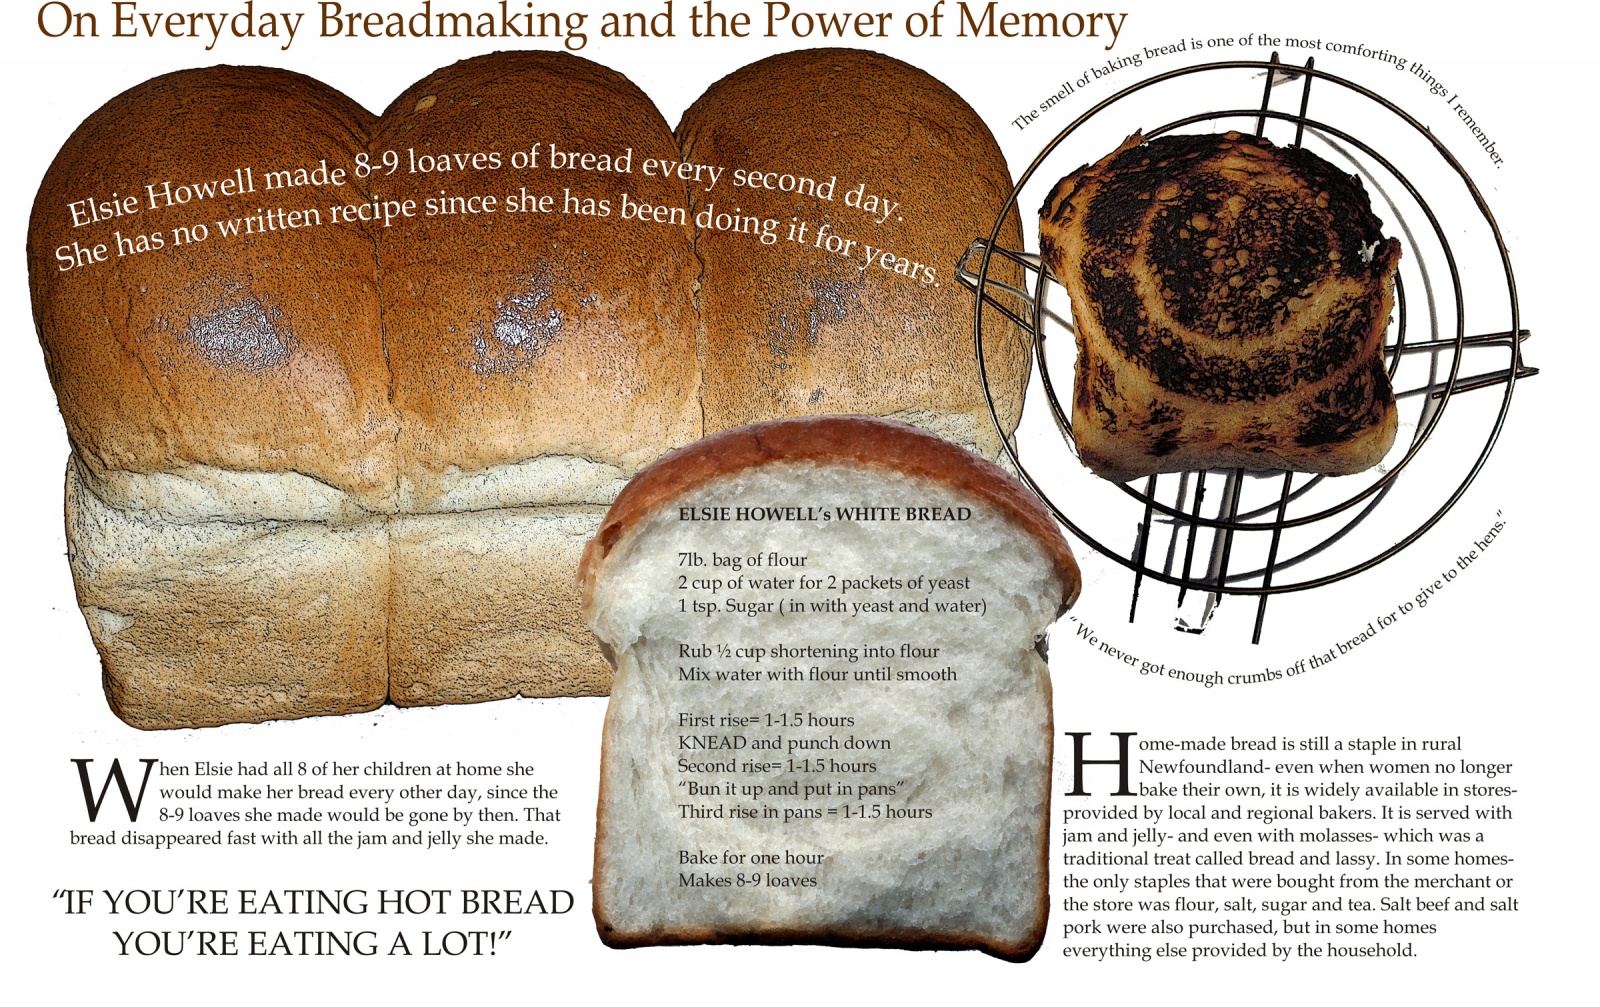 On Everyday Breadmaking and the Power of Memory